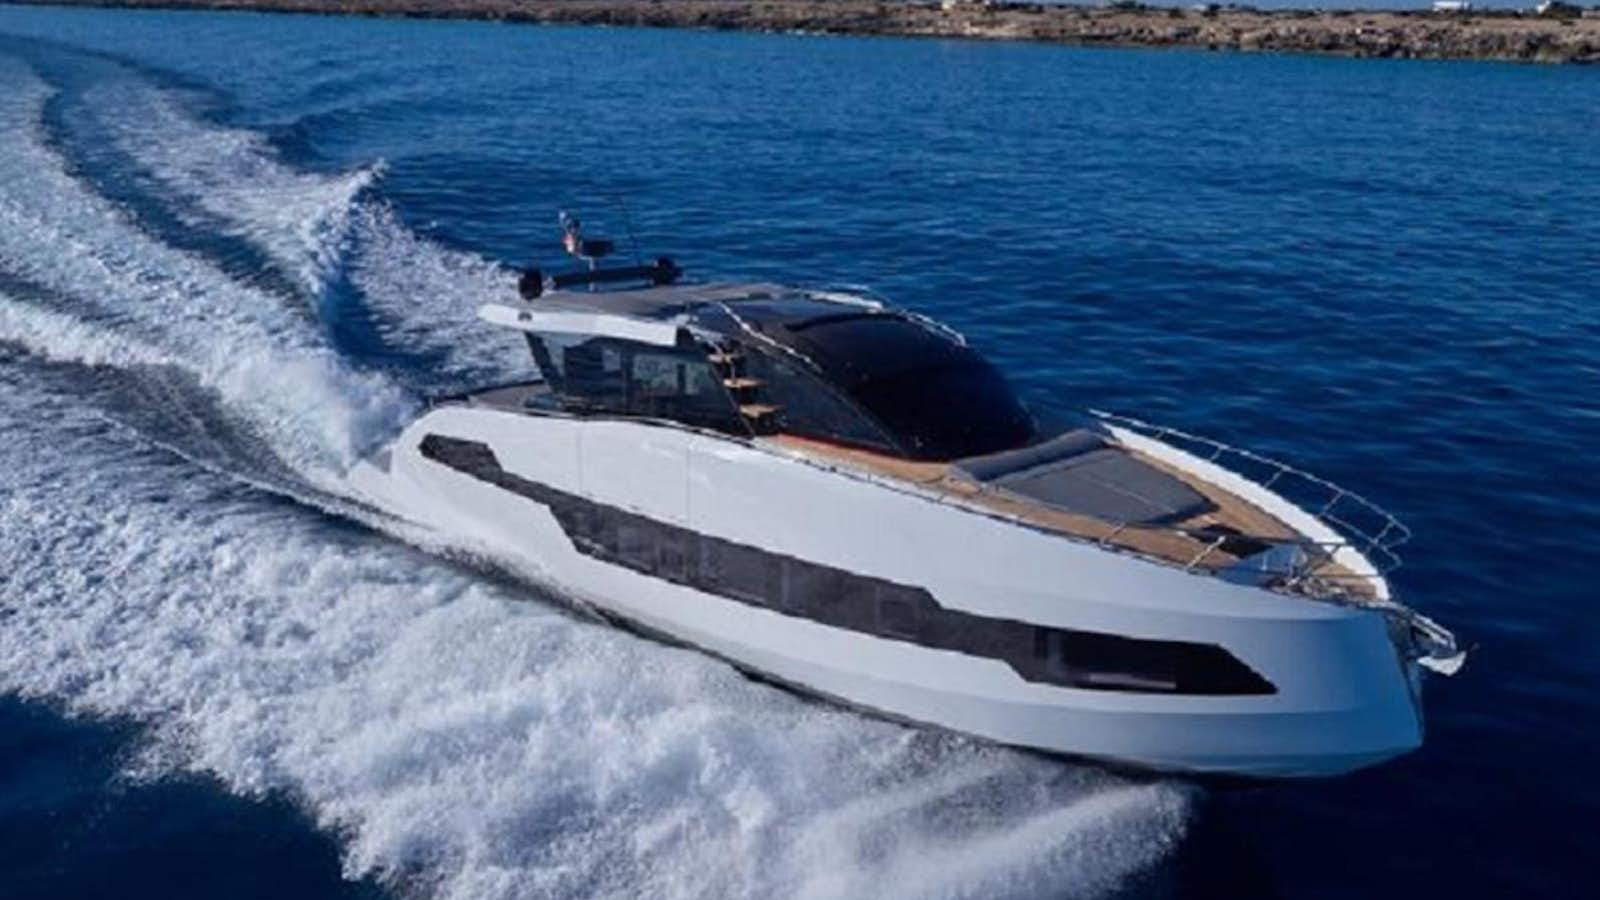 Watch Video for 2021 ASTONDOA 655 COUPE Yacht for Sale